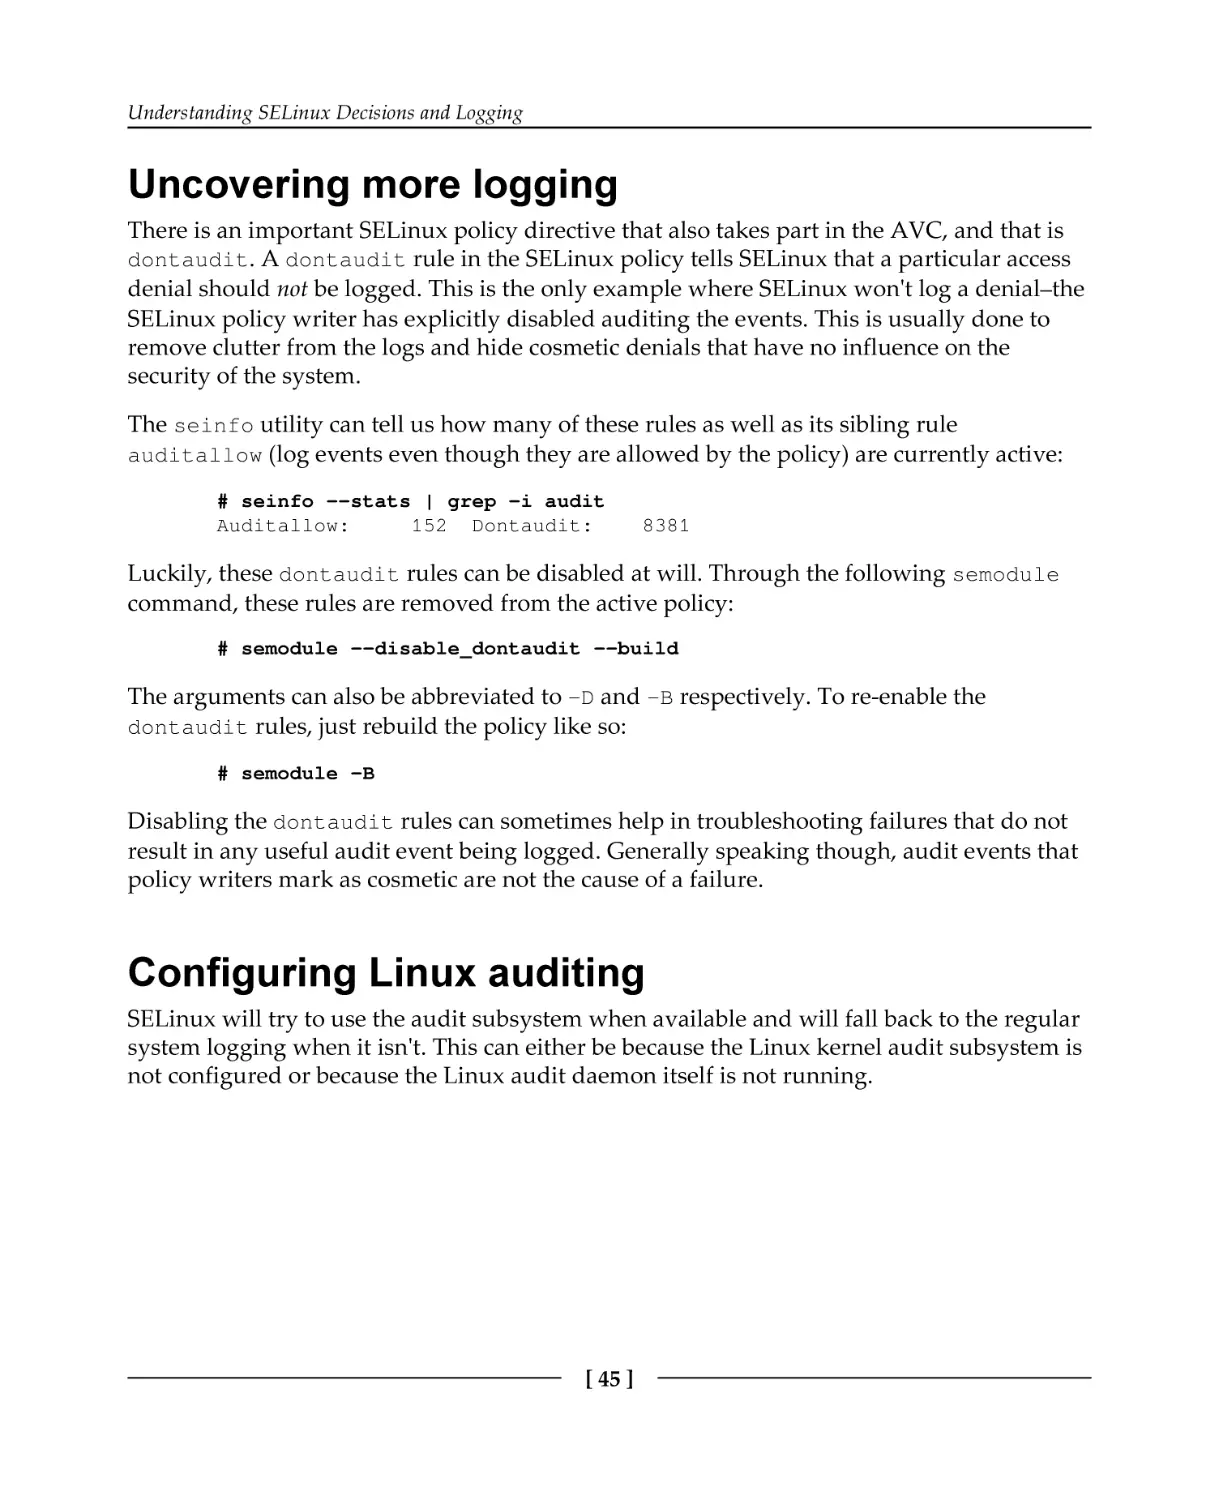 Uncovering more logging
Configuring Linux auditing